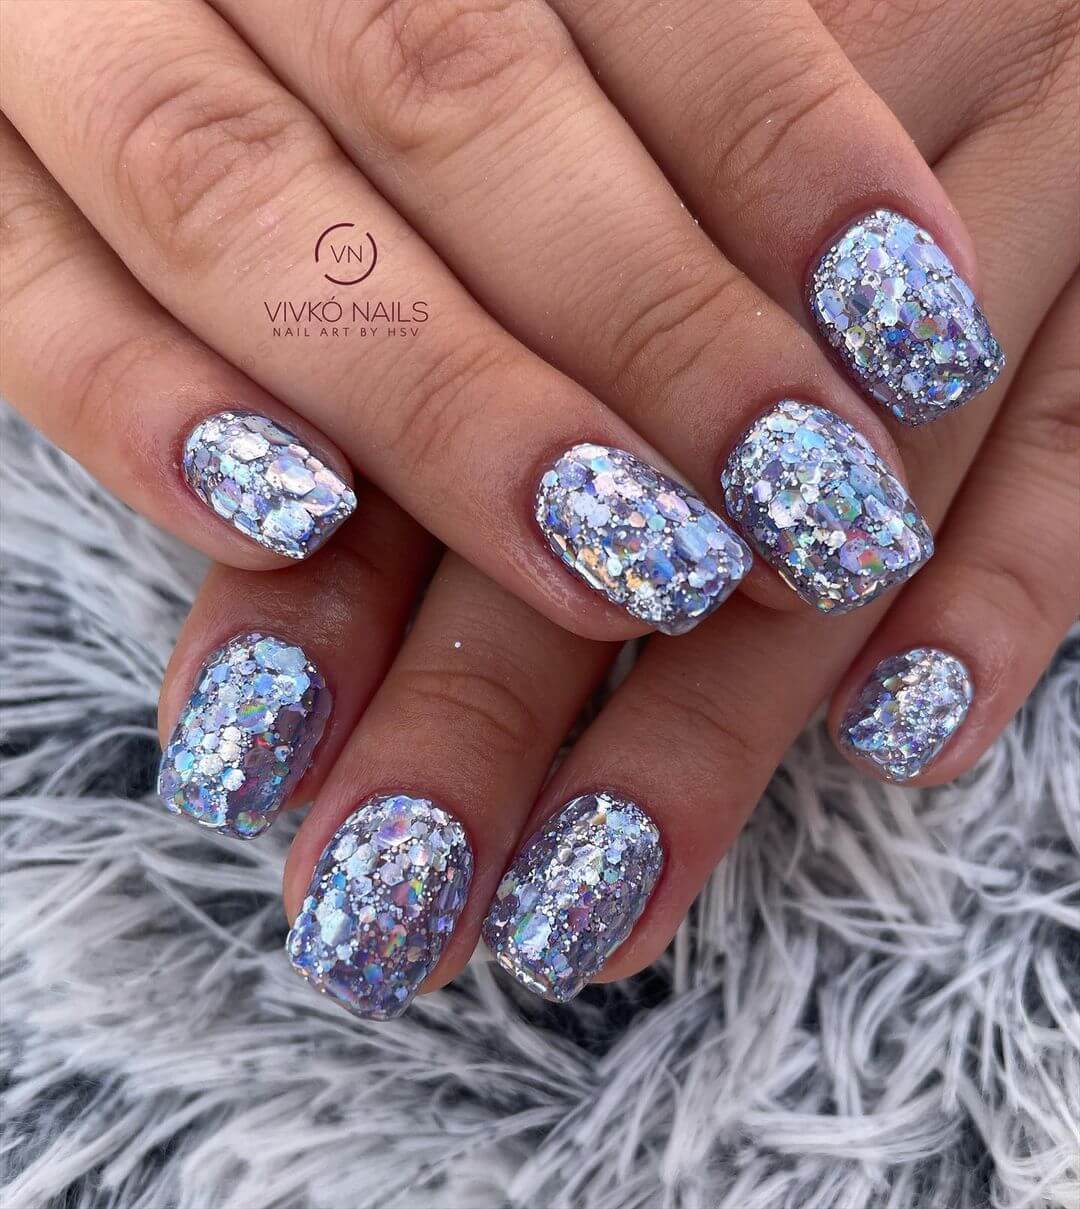 Crystal Nail Art Designs Love for vibrant is never-ending!